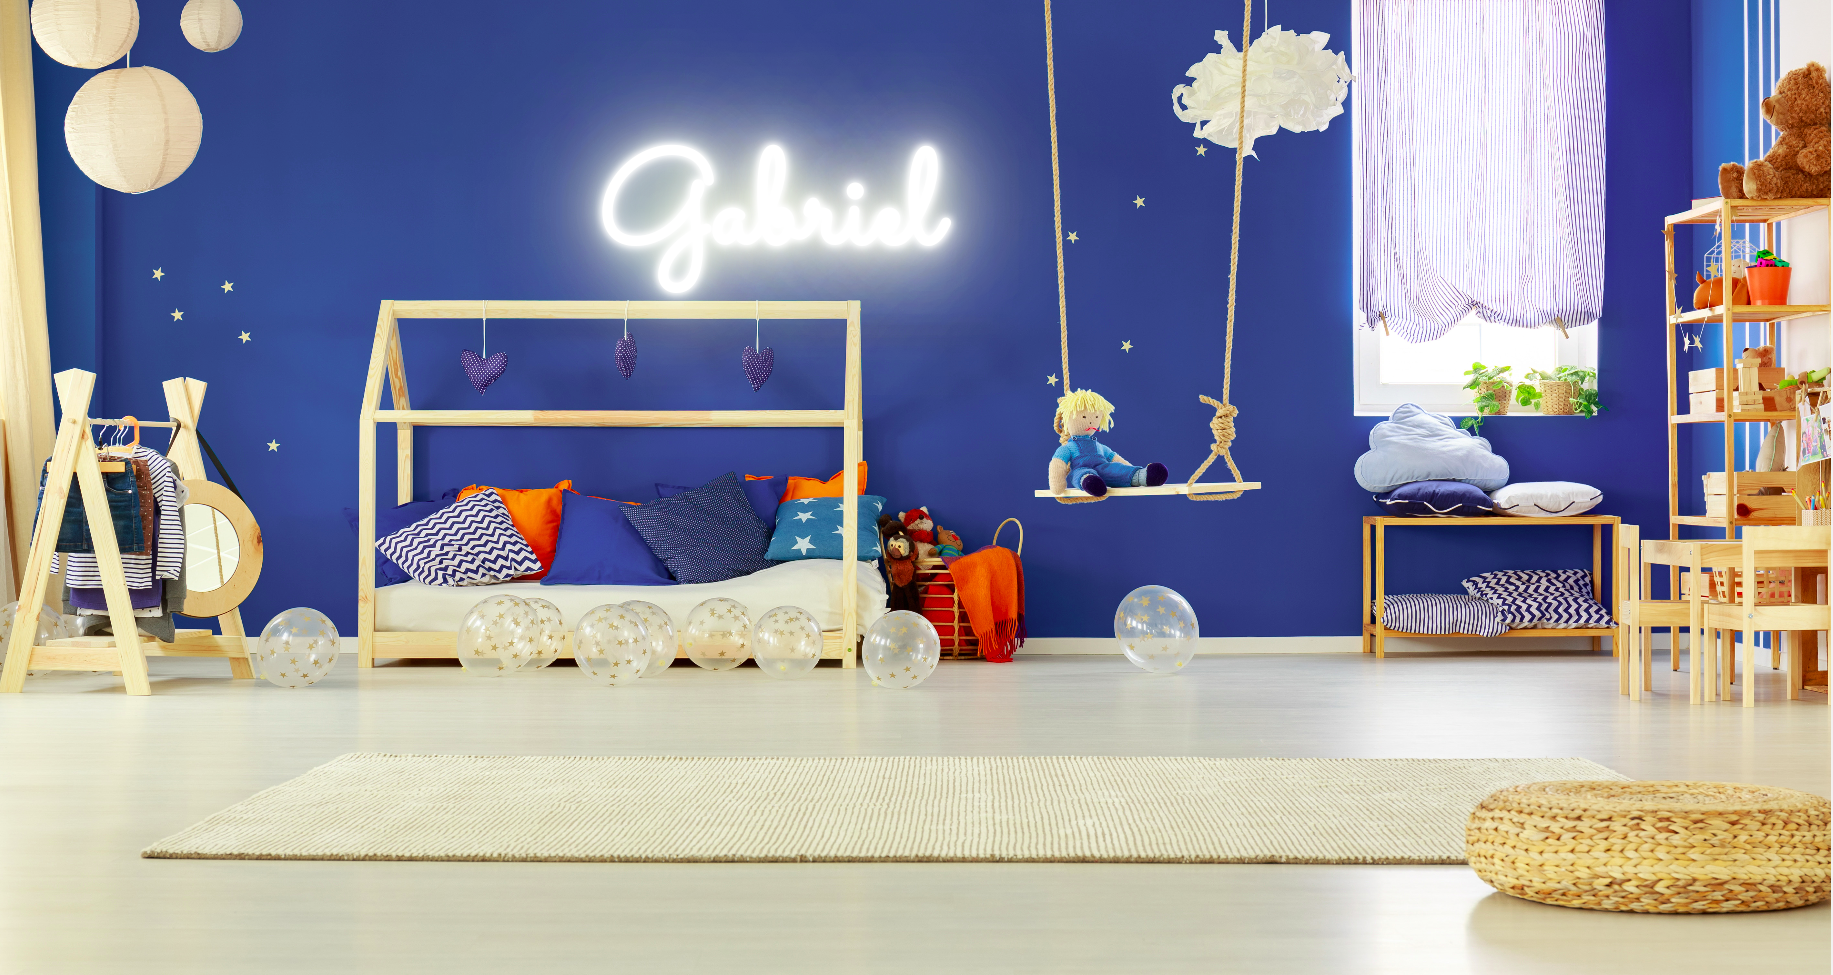 "Gabriel " Baby Name LED Neon Sign